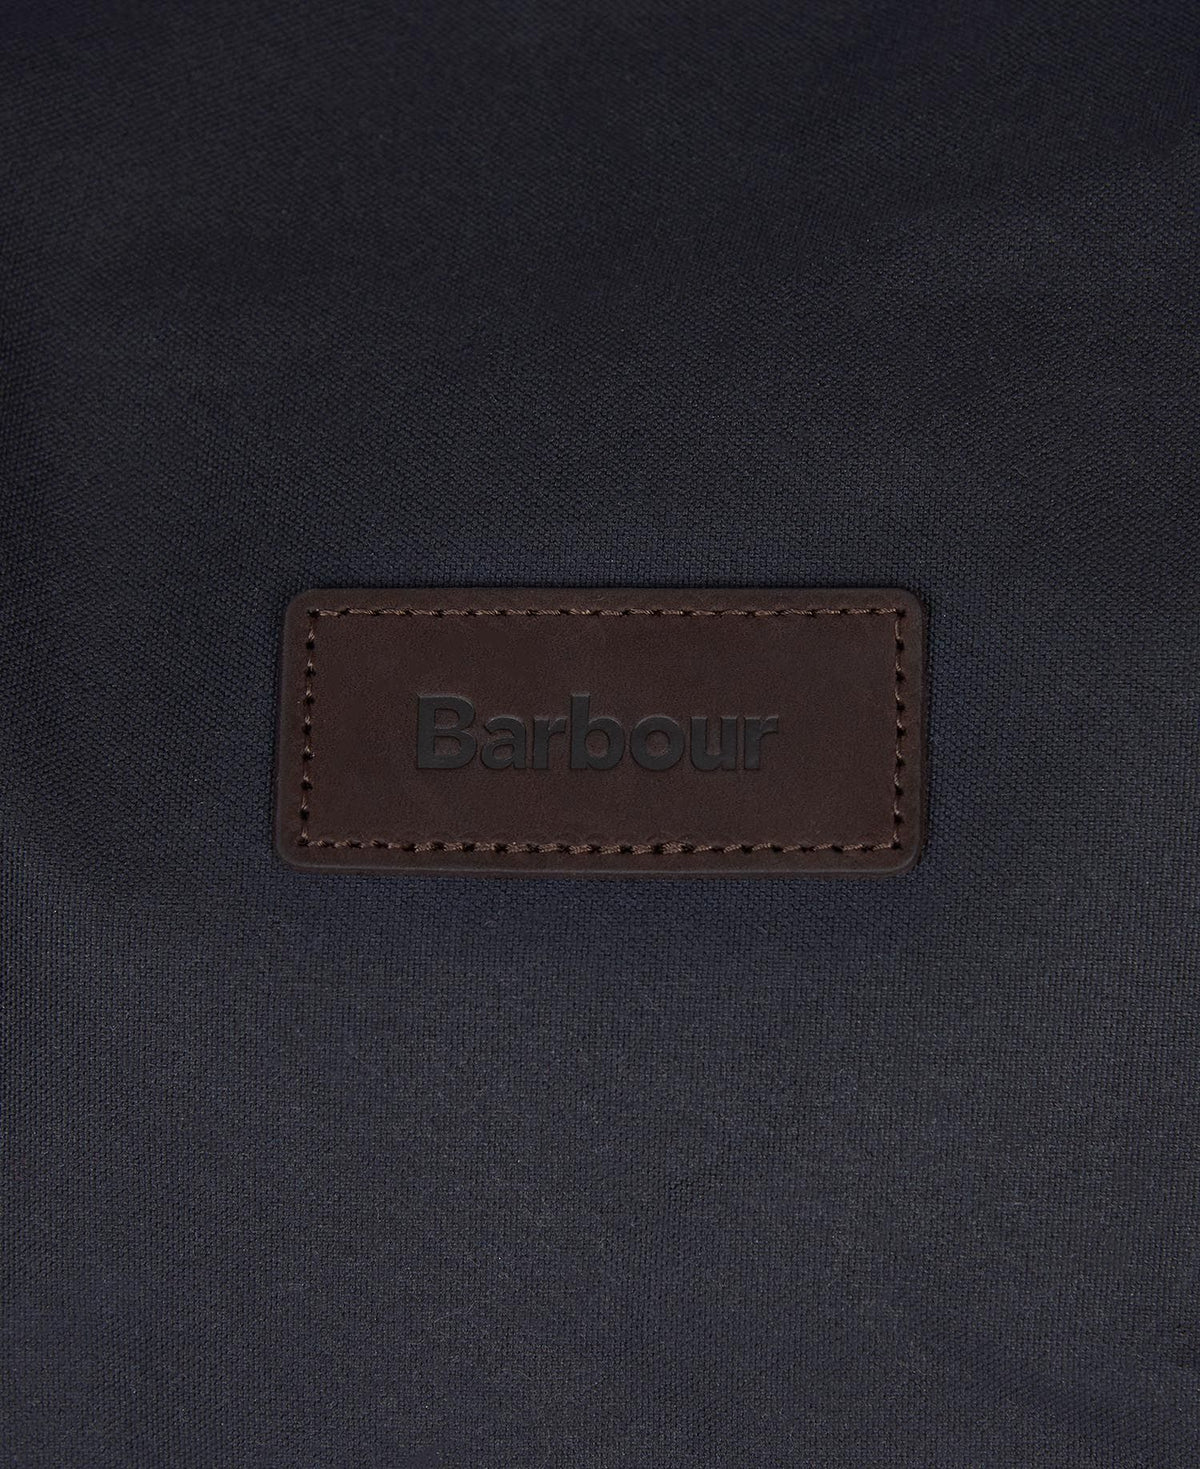 Barbour Mens Wax Essential Holdall, 09, Uba0017, Navy